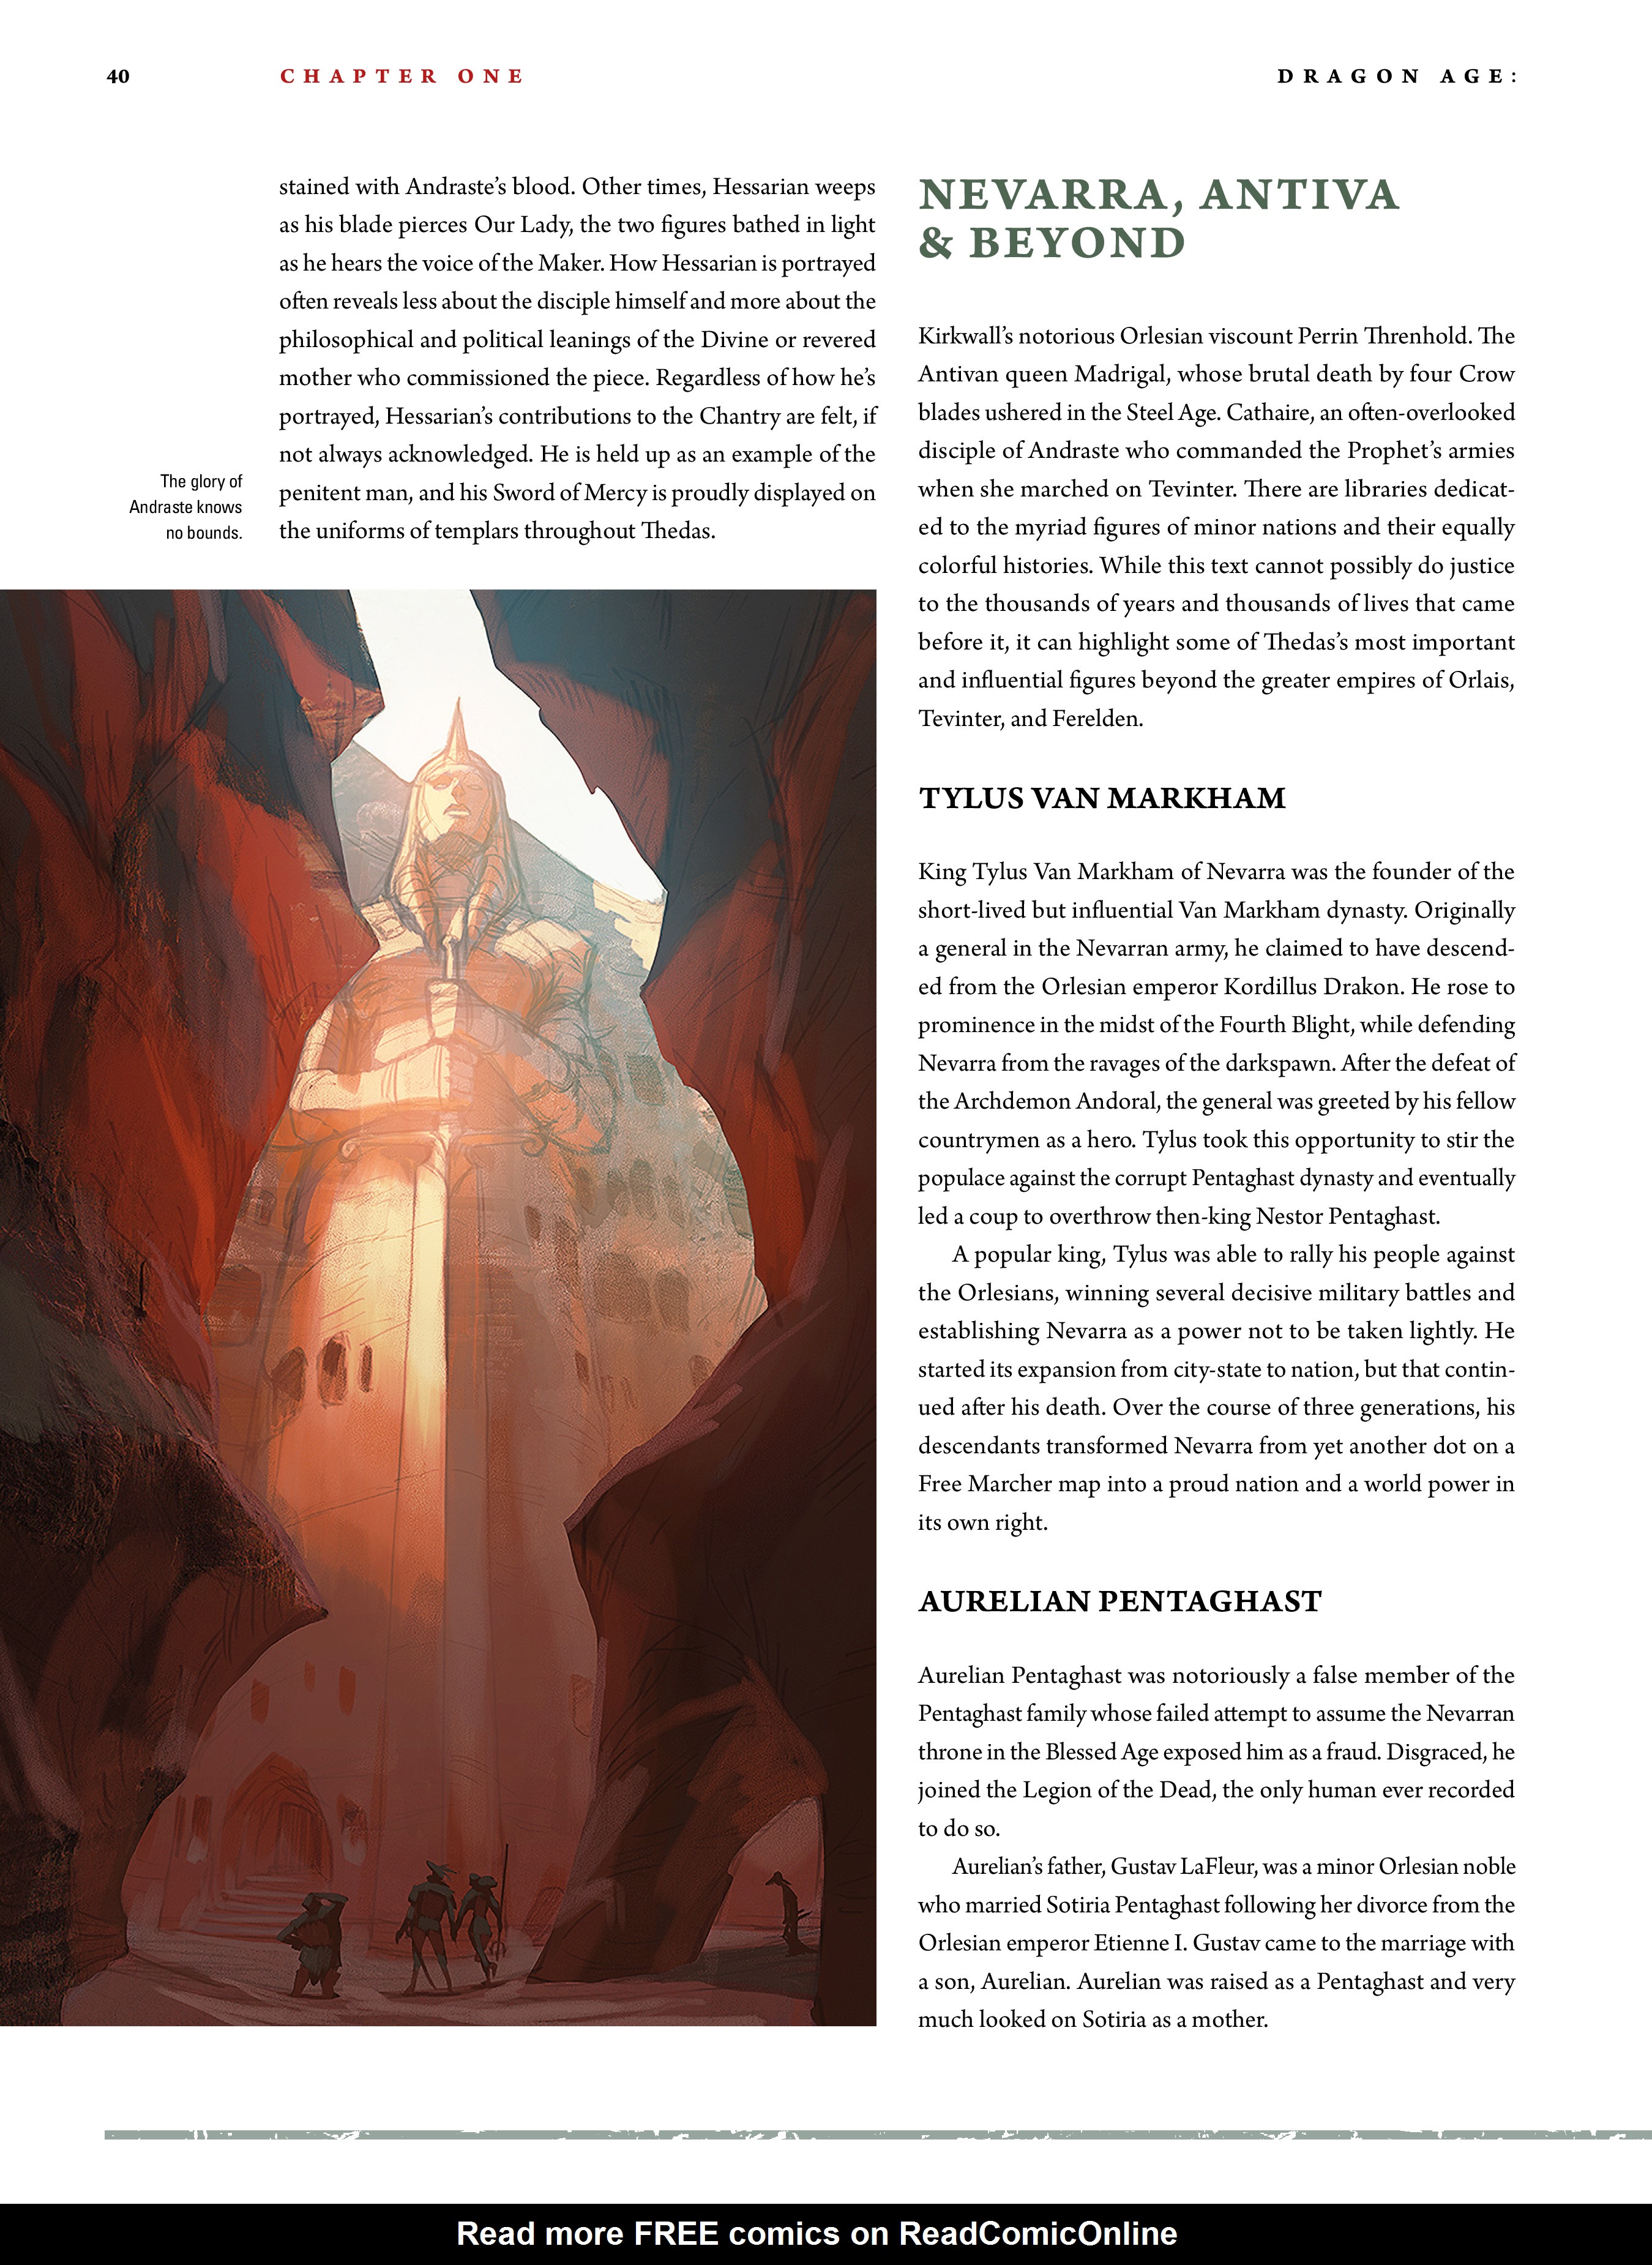 Read online Dragon Age: The World of Thedas comic -  Issue # TPB 2 - 37